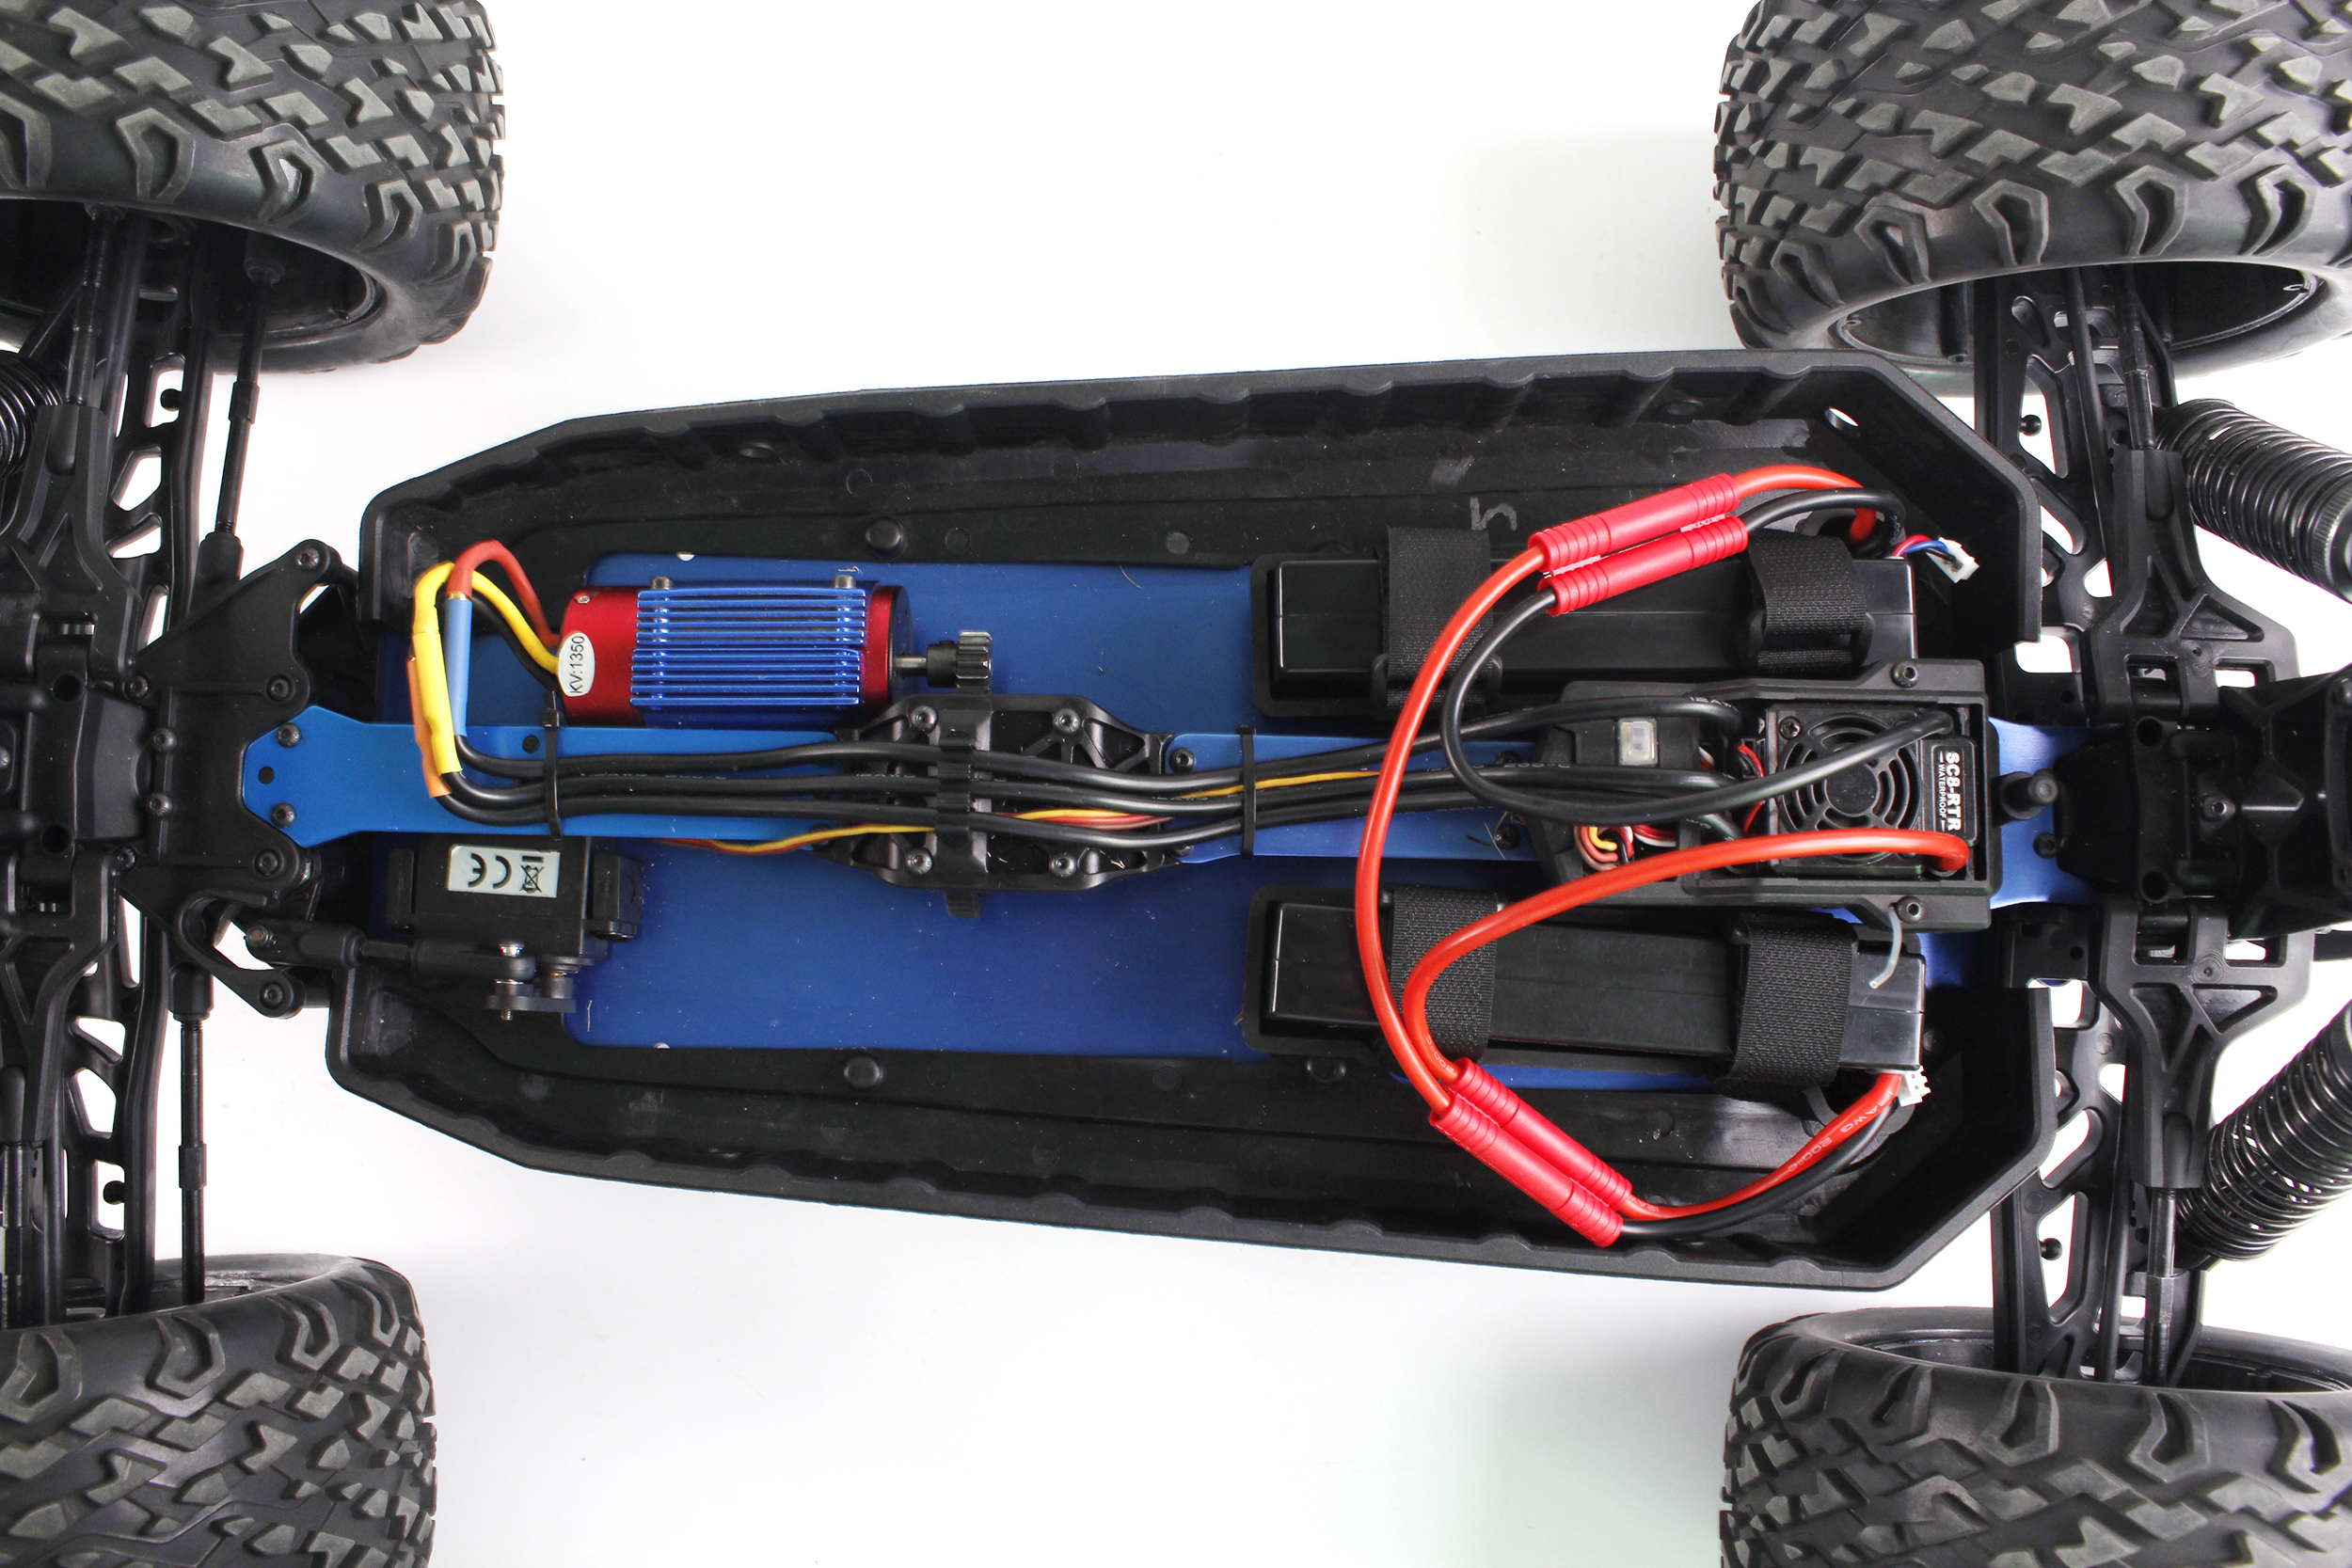  1/6 4WD  - ad Monster (22S LiPo)